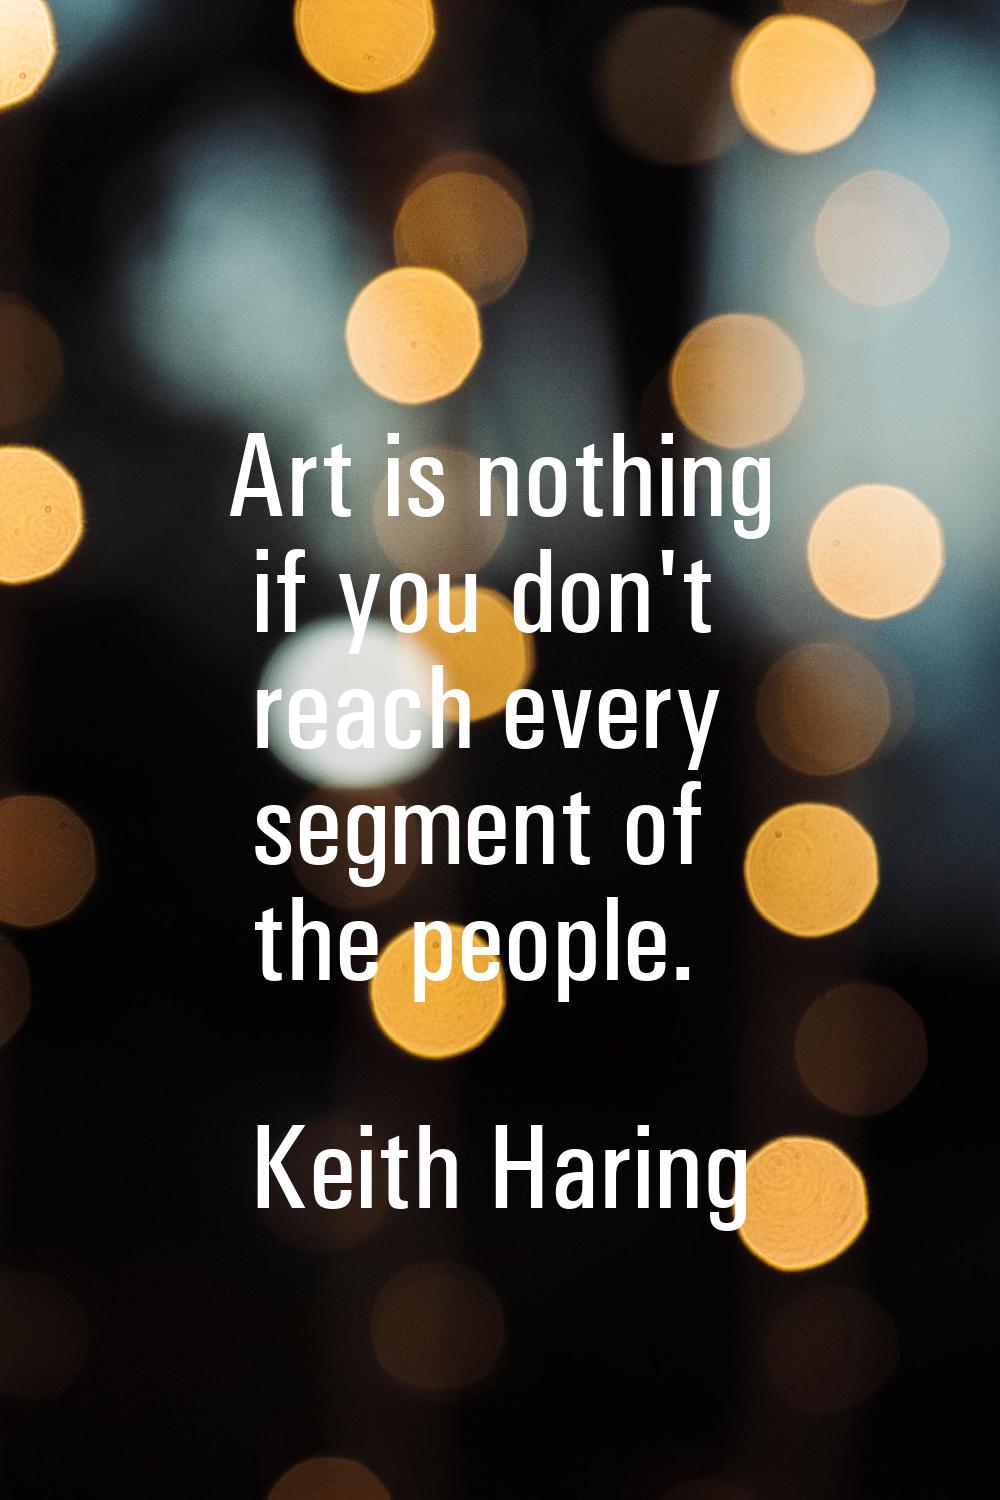 Art is nothing if you don't reach every segment of the people.